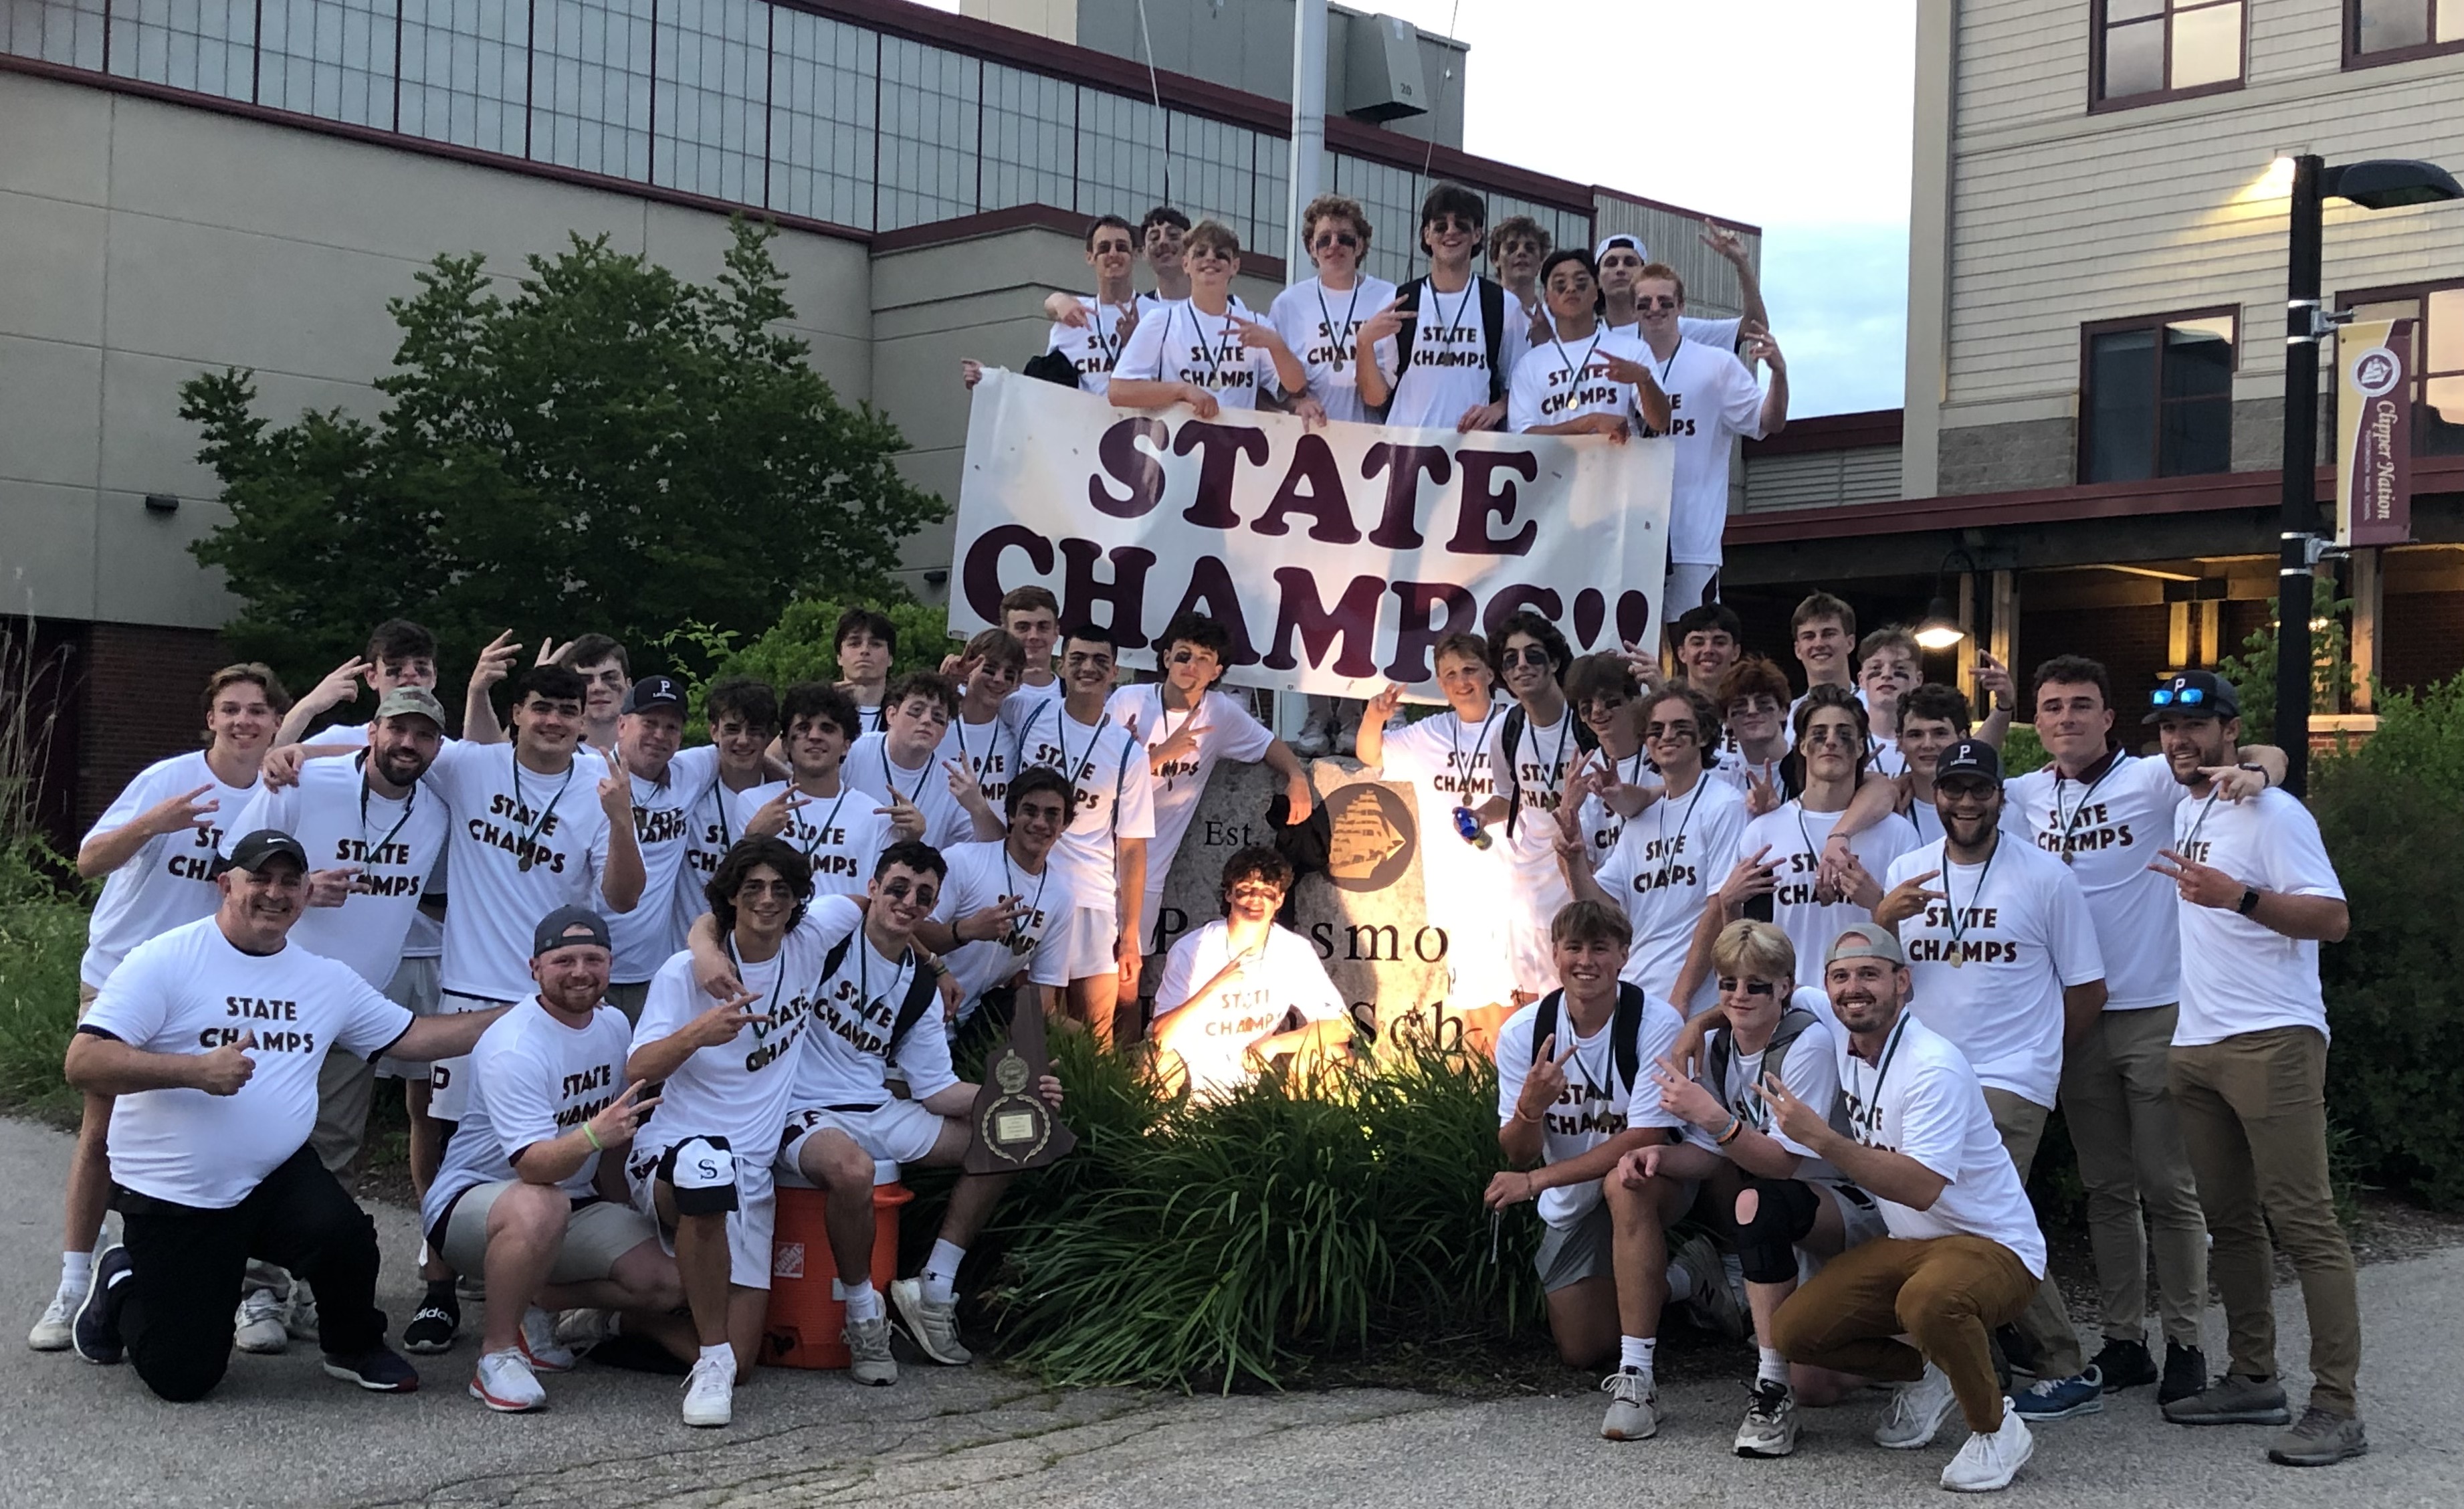 2022 DII BOYS LACROSSE STATE CHAMPIONS